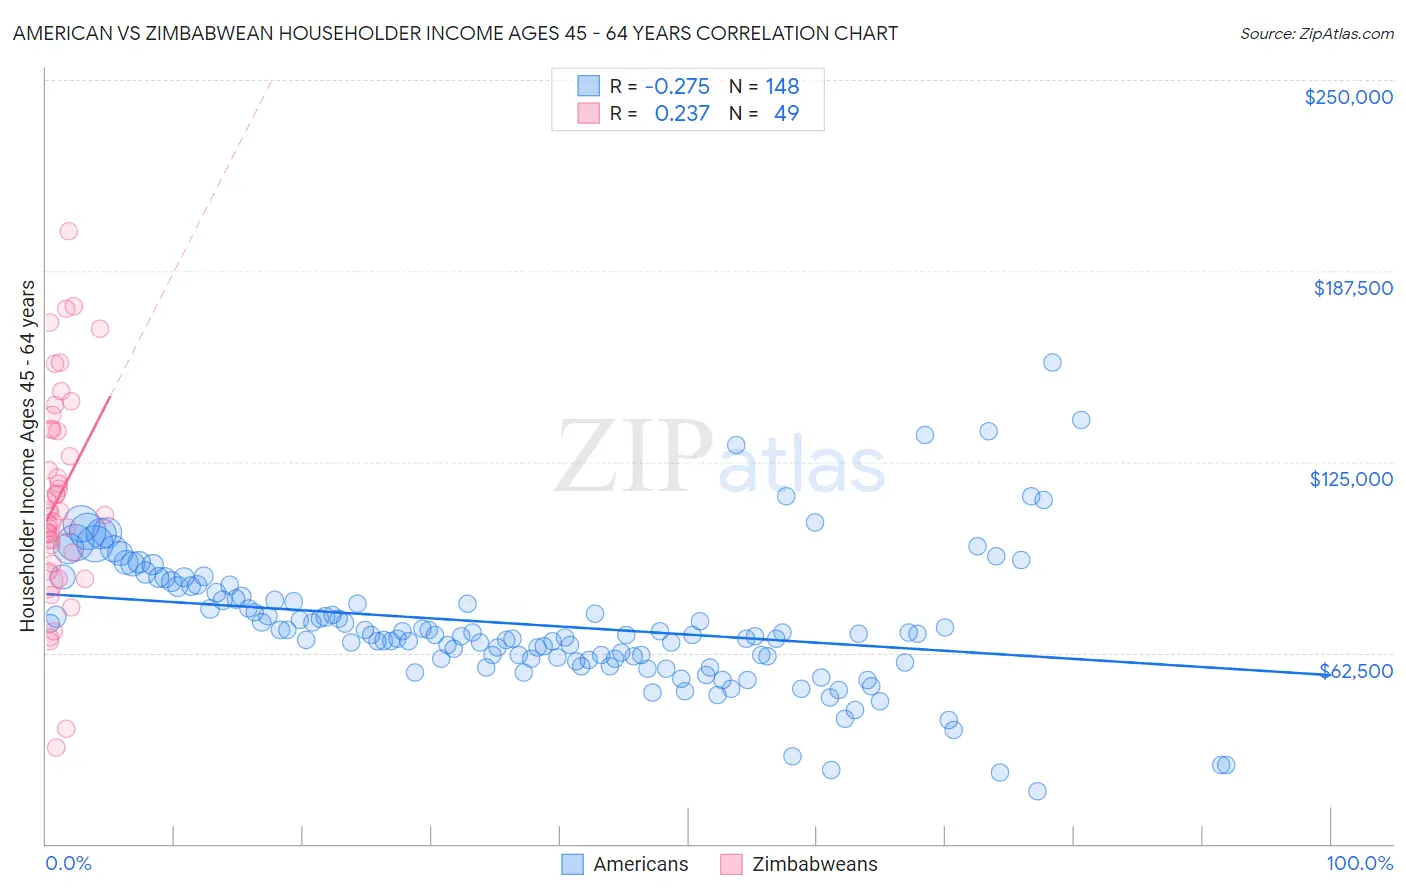 American vs Zimbabwean Householder Income Ages 45 - 64 years